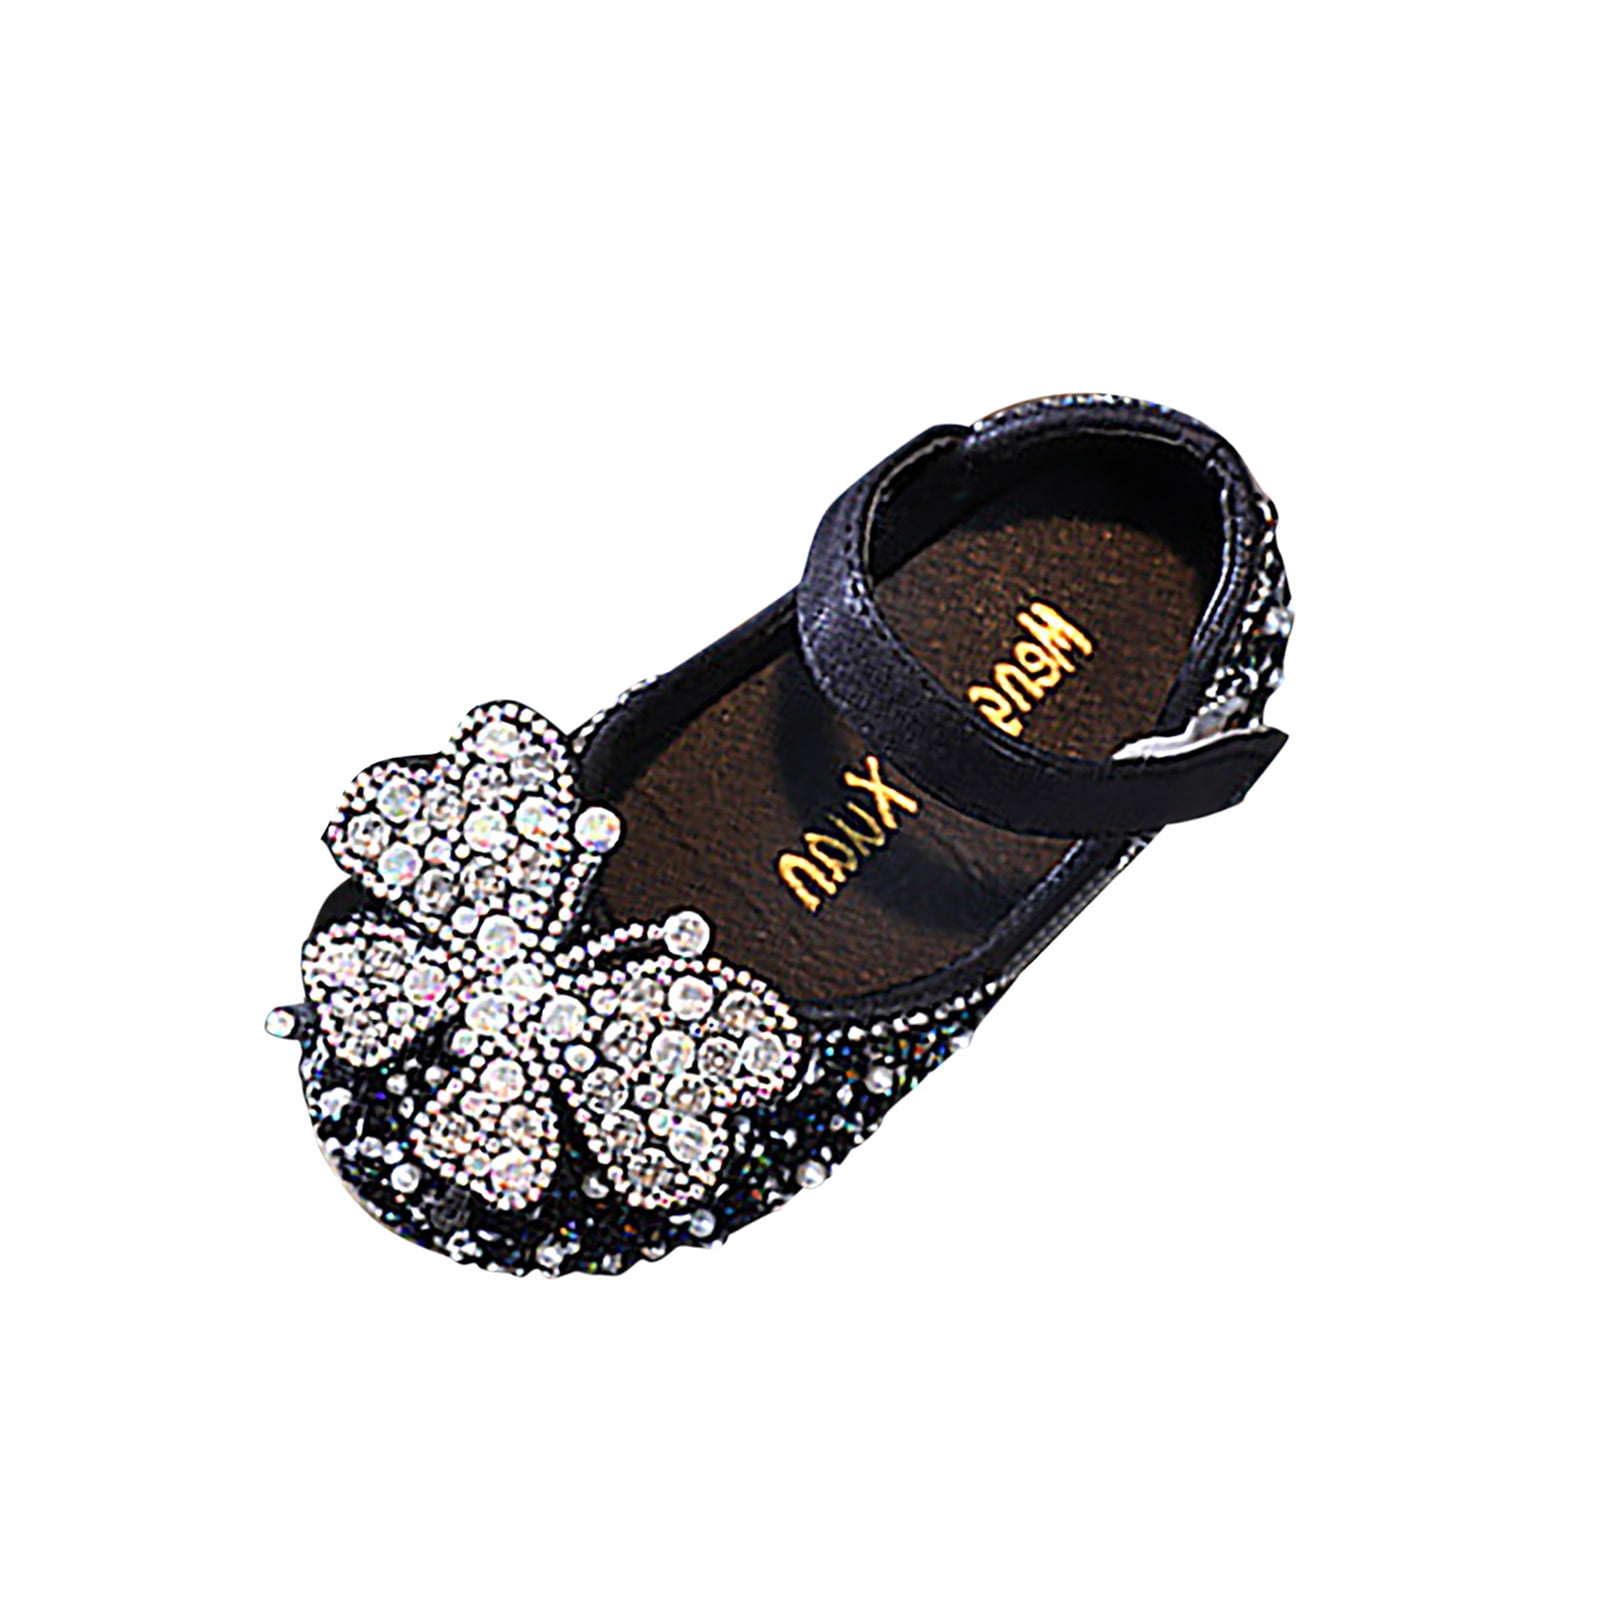 MPWEGNP Childrens Shoes Pearl Rhinestones Shining Kids Princess Shoes Baby Girls Shoes For And Wedding Dancing Shoes Slippers Size 1 Big Slippers 12 - Walmart.com